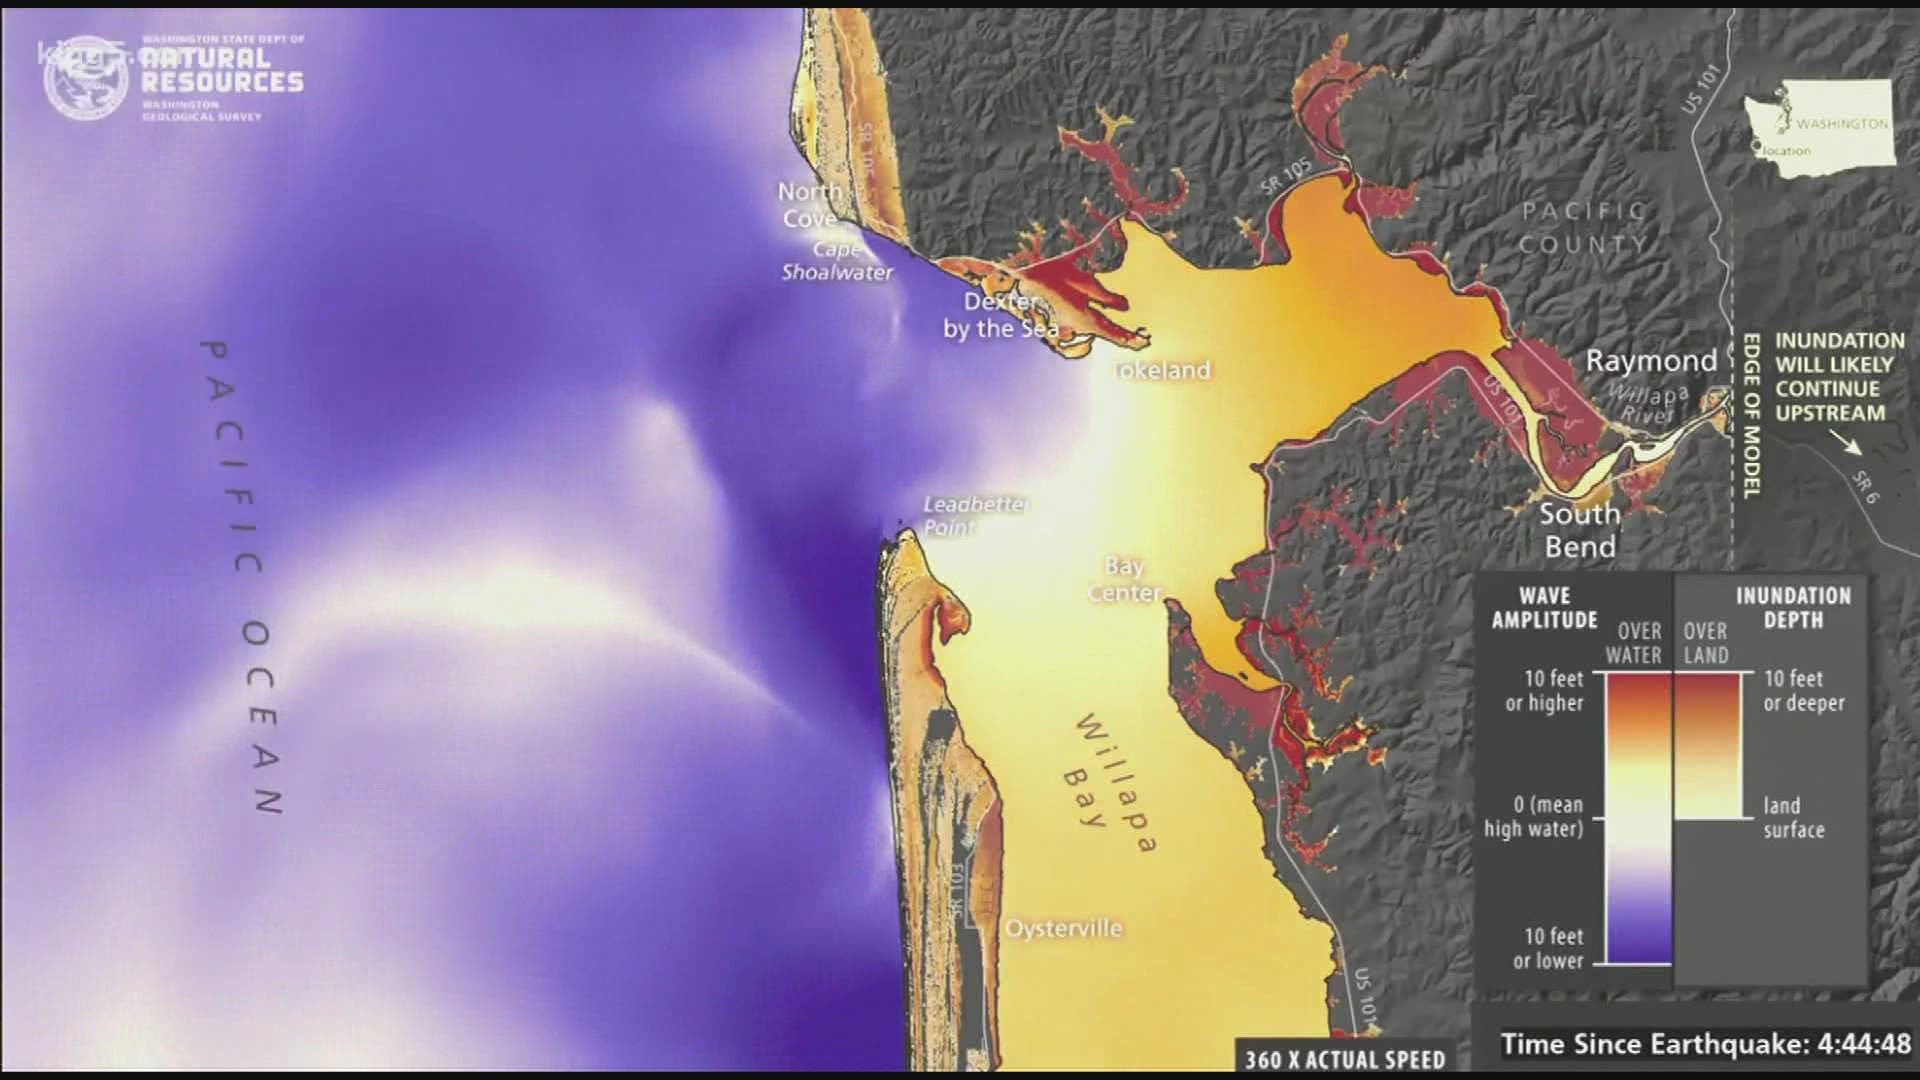 The Washington State Department of Natural Resources released tsunami simulations that show the impact of a magnitude 9 earthquake on Grays Harbor and Willapa Bay.